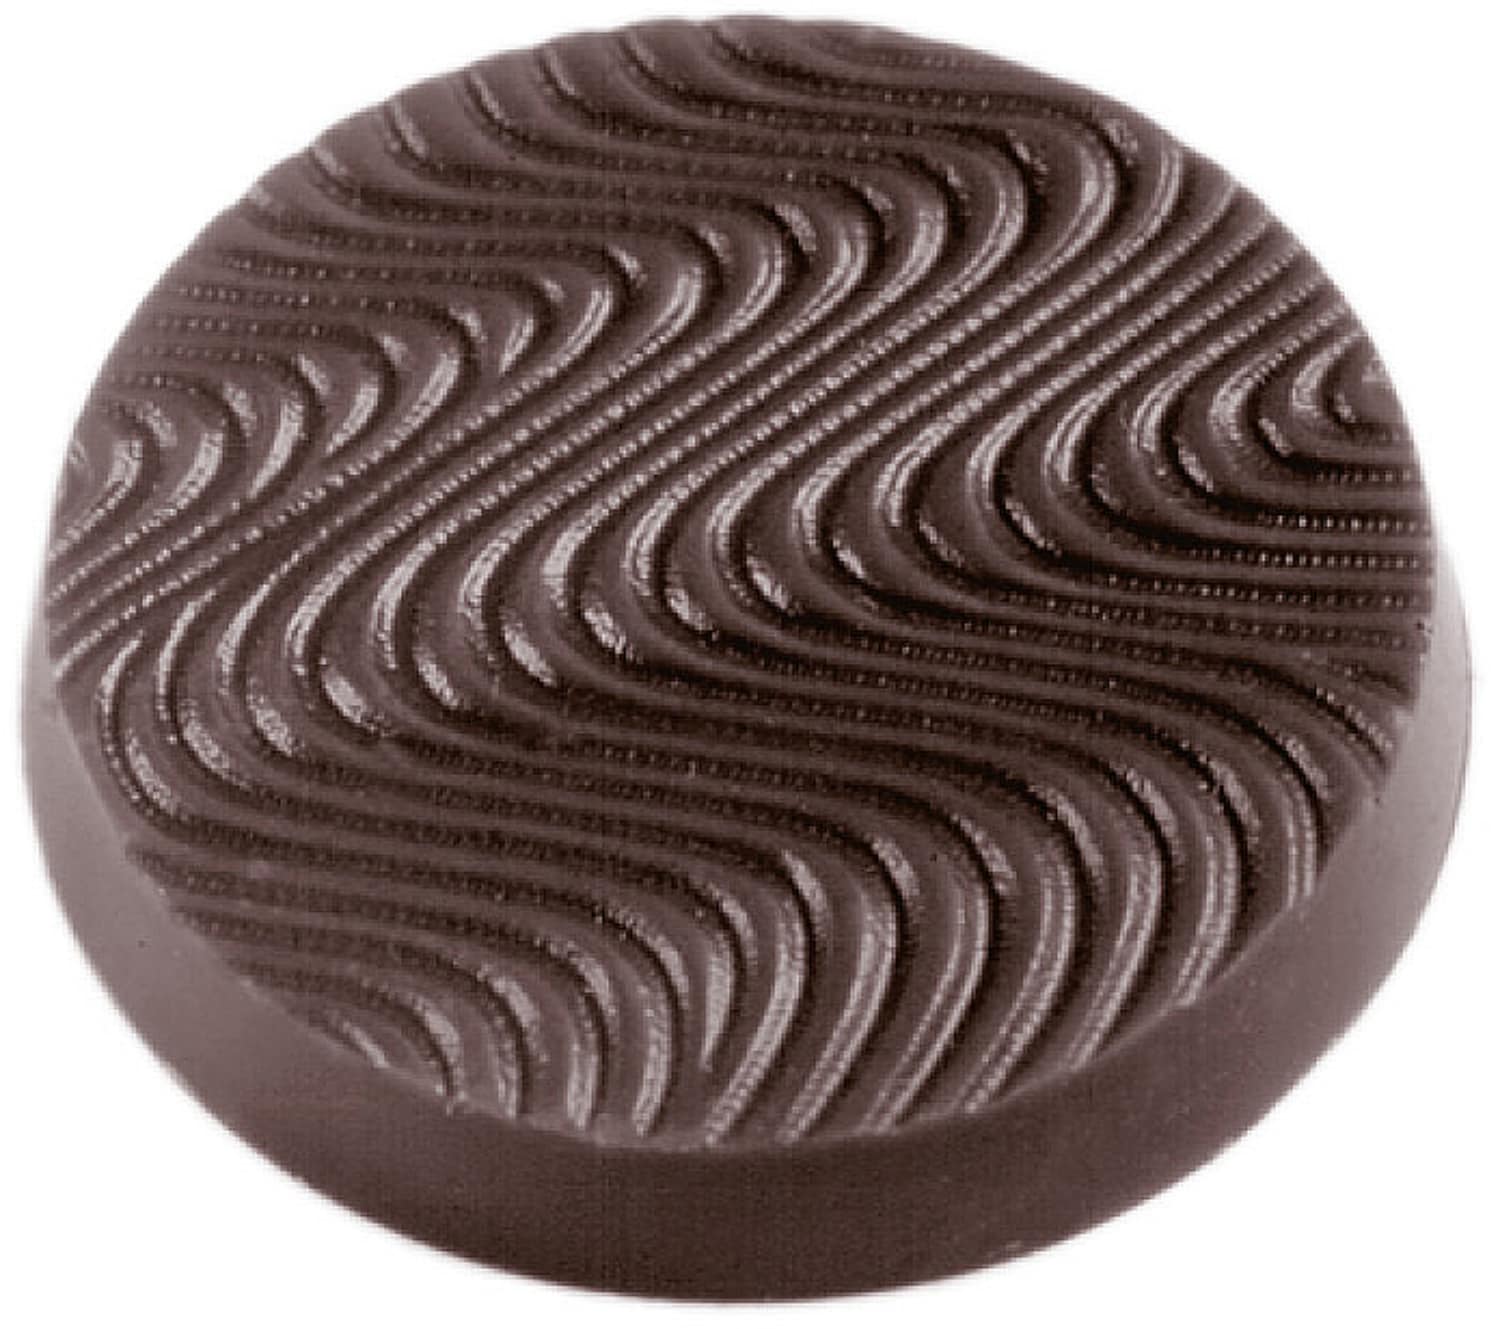 Chocolate mould "Biscuit" 421456